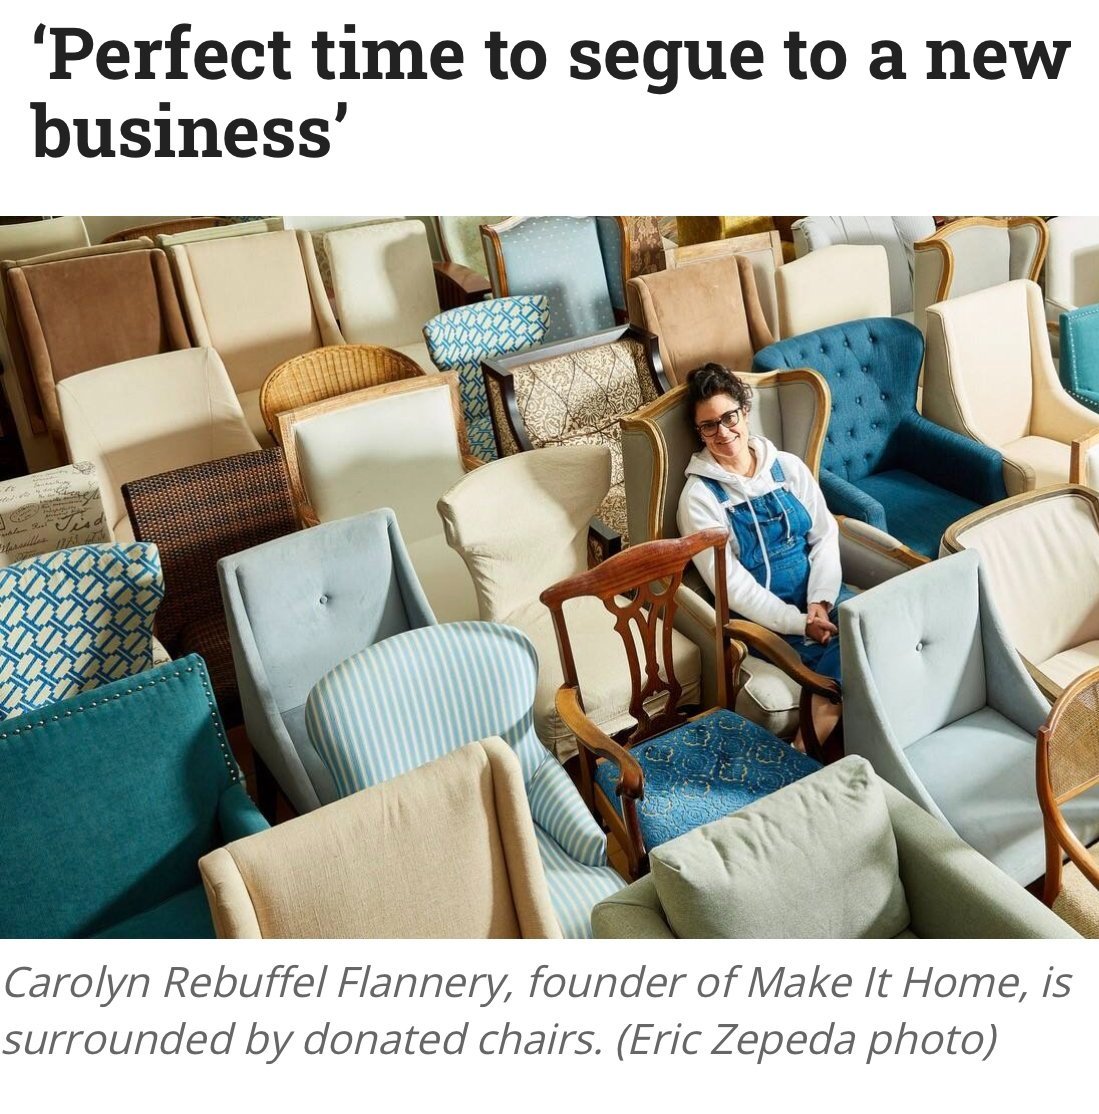 Carolyn Flannery's journey to solving furniture poverty in the Bay Area. Learn how Make It Home has helped 450 households in need during the pandemic